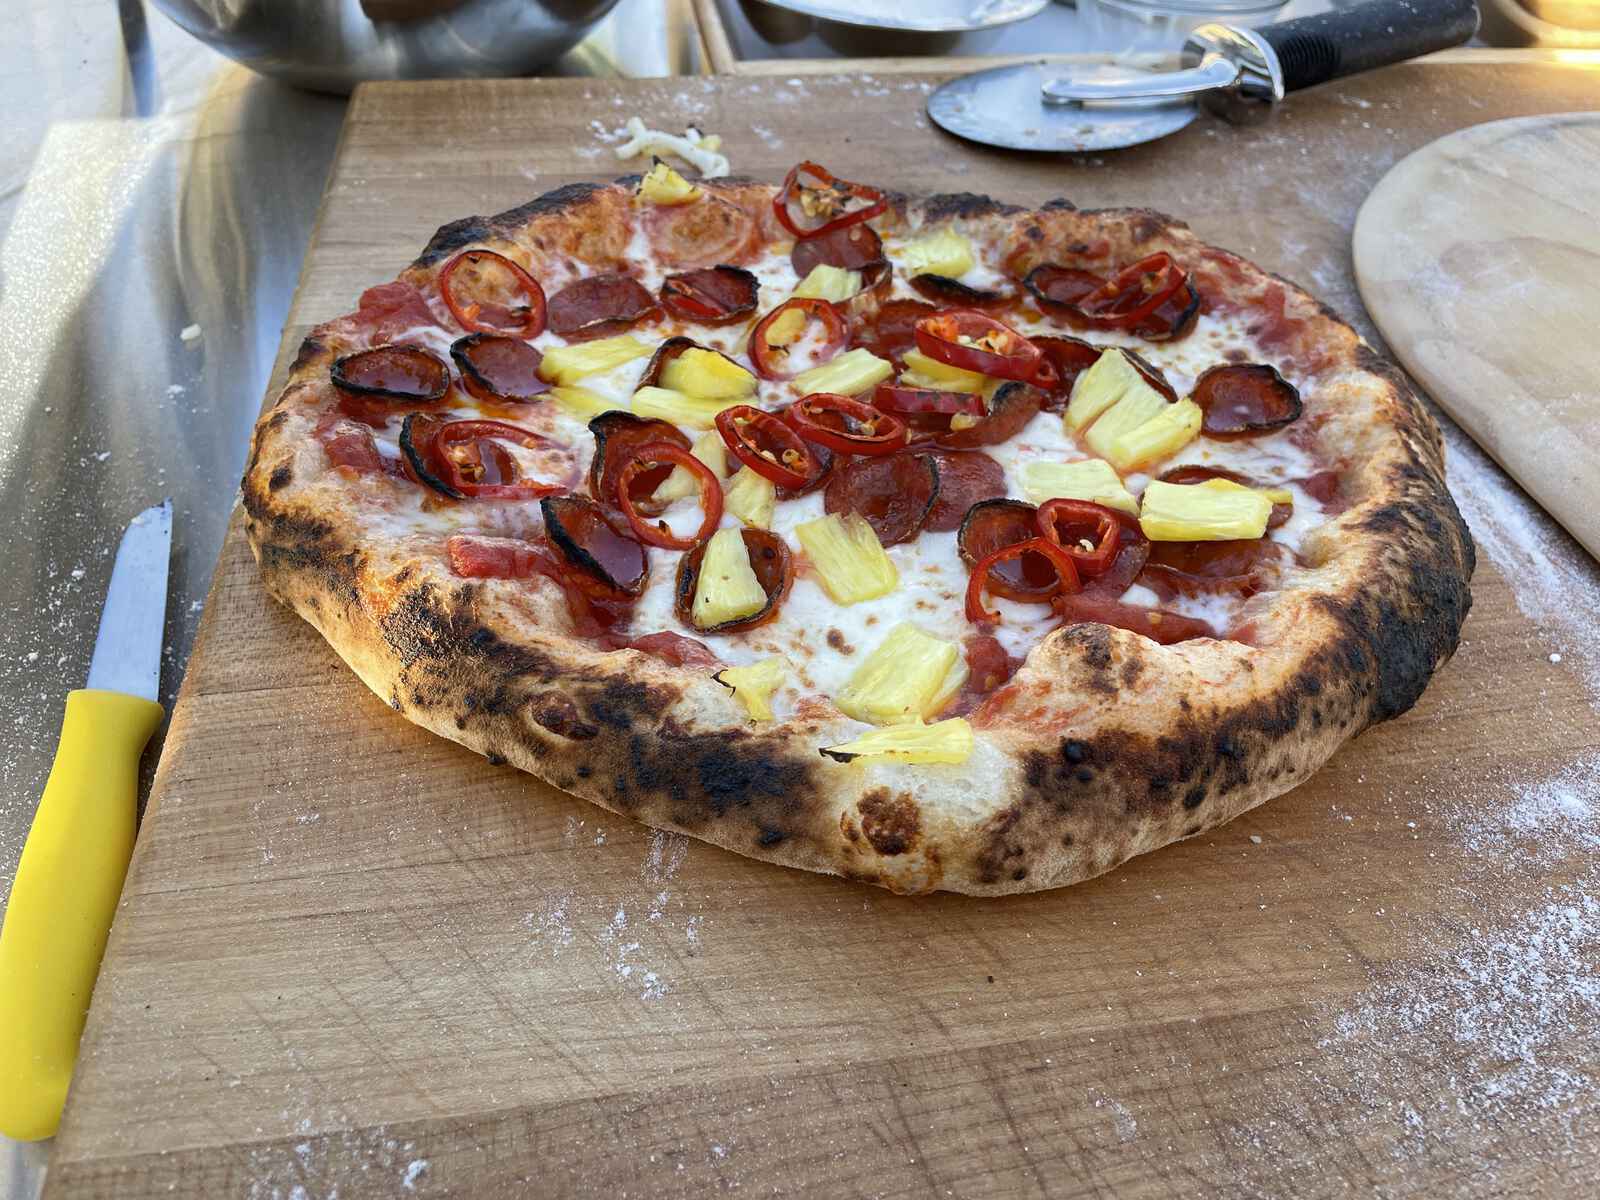 Pineapple on a pizza